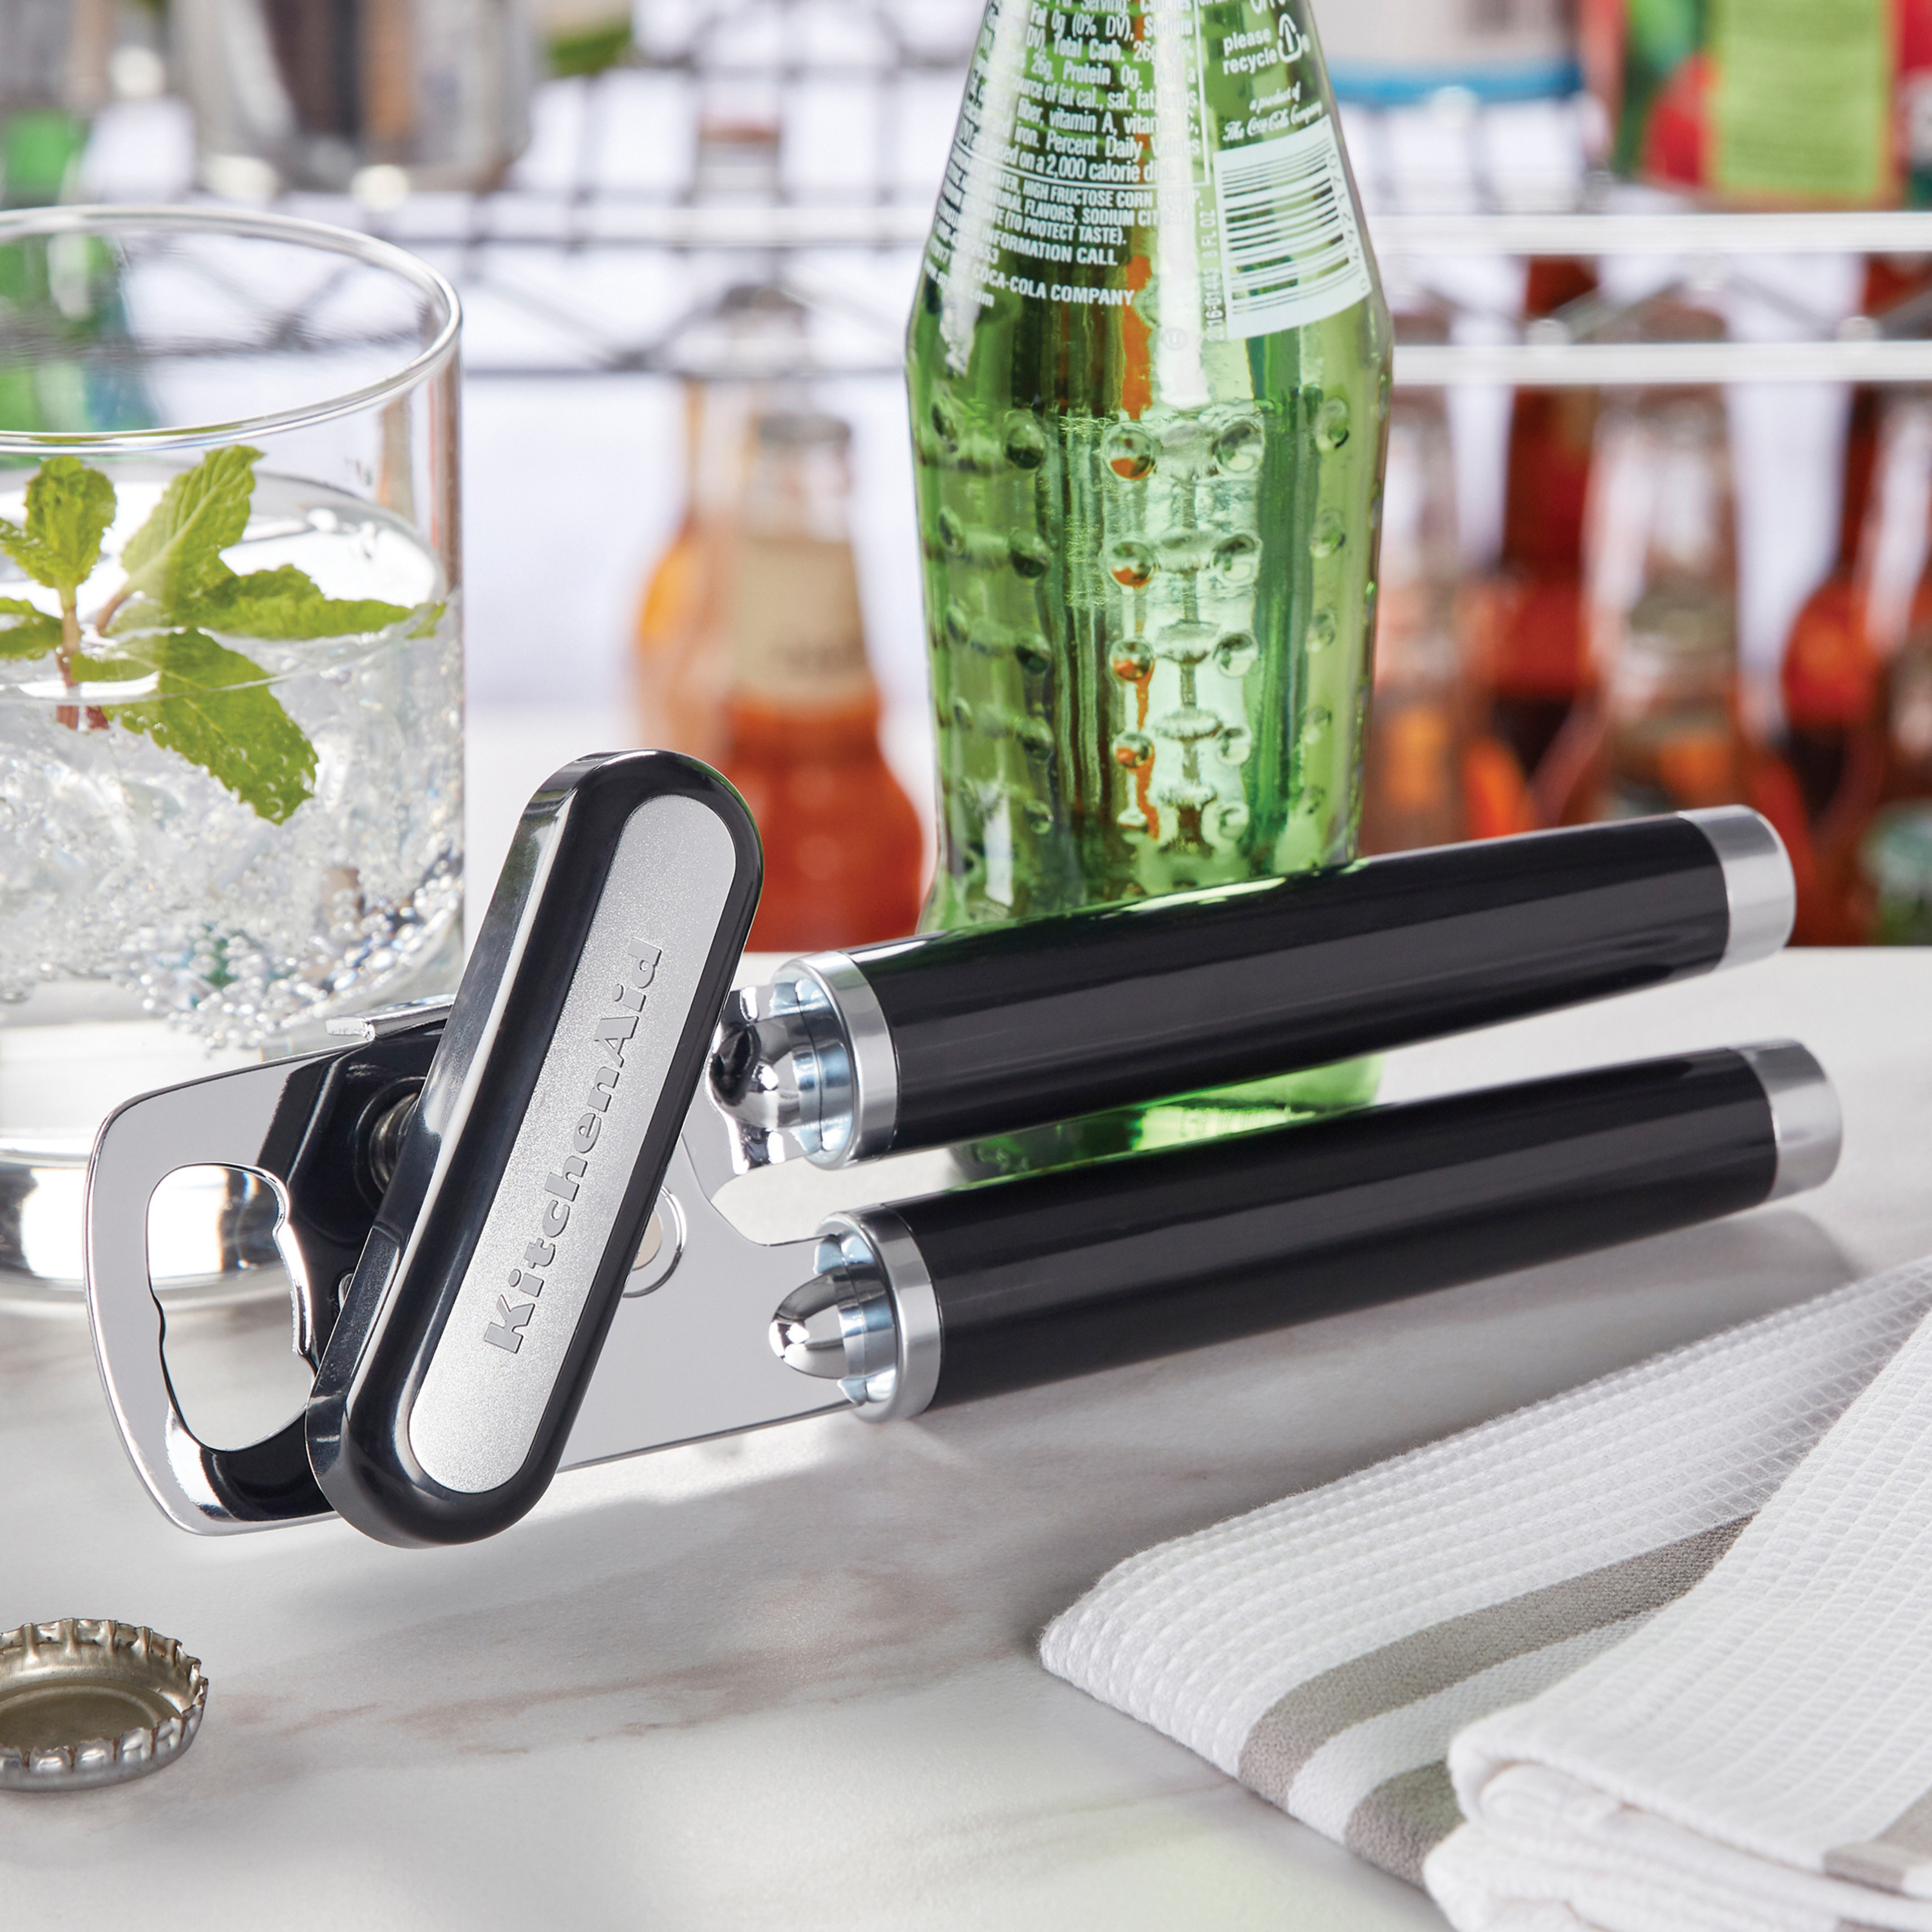 black multifunction can opener on a table next to a bottle